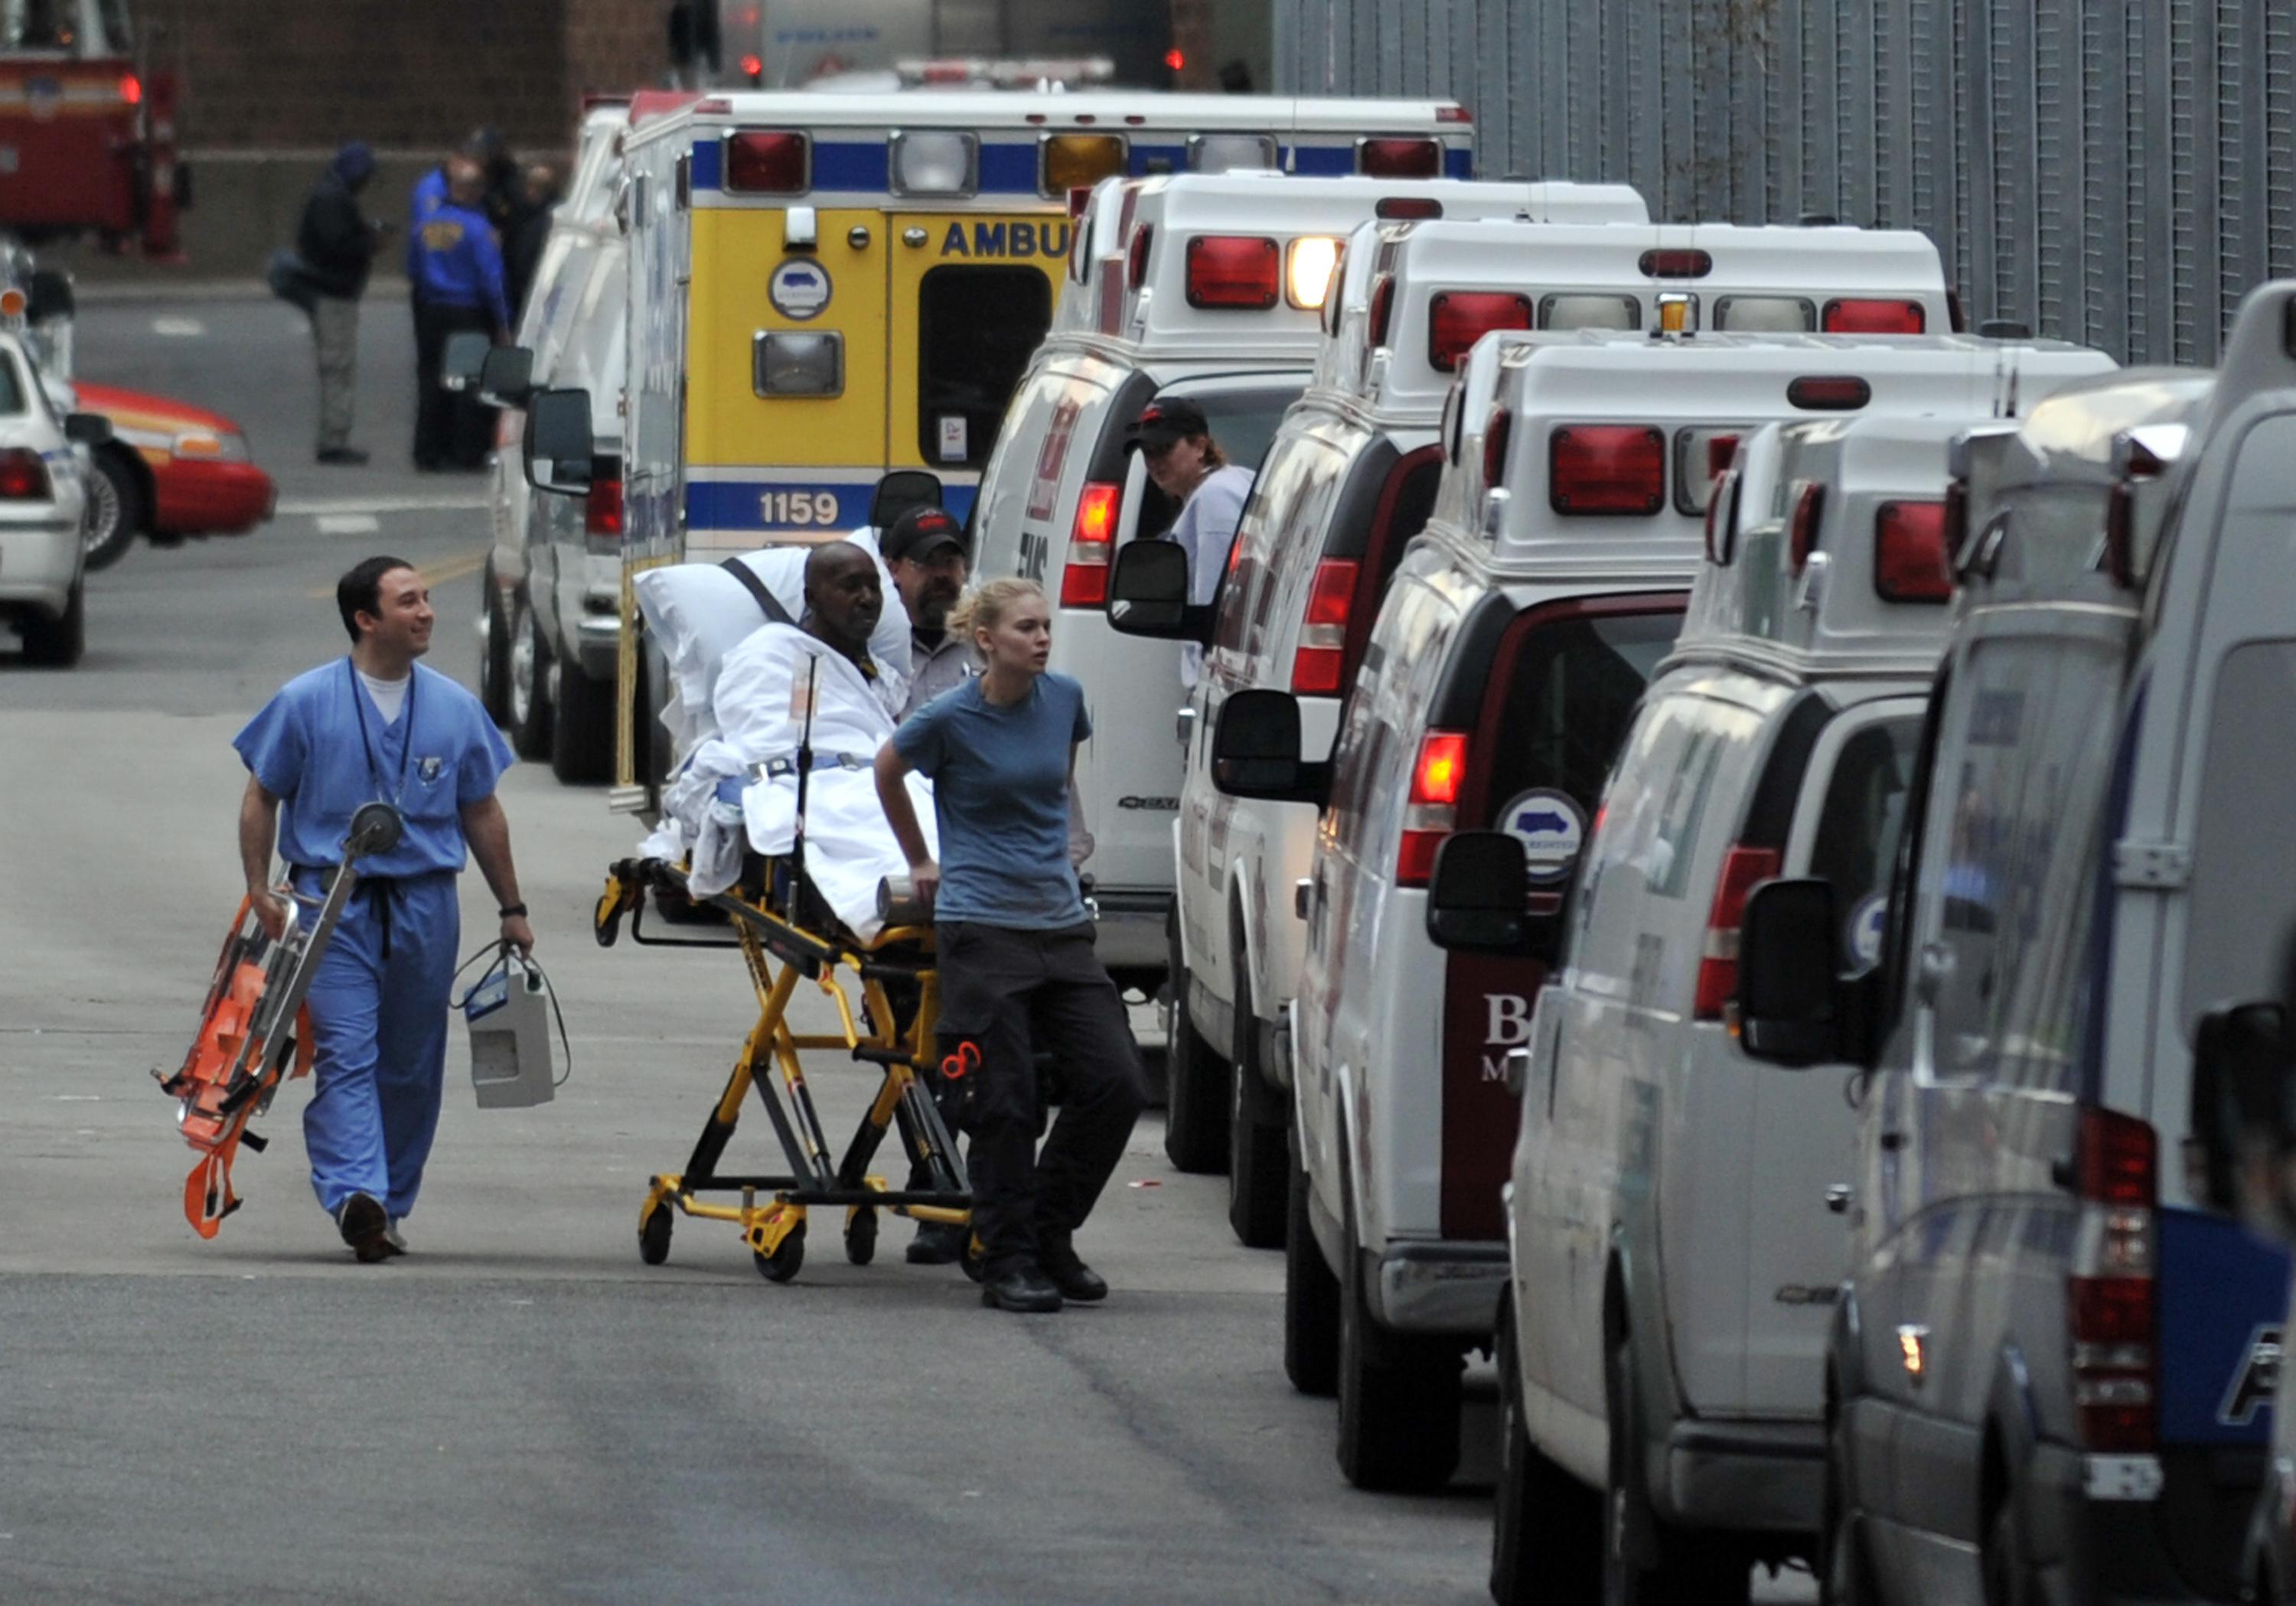 A patient is evacuated from Bellevue Hospital on October 31, 2012 in New York.